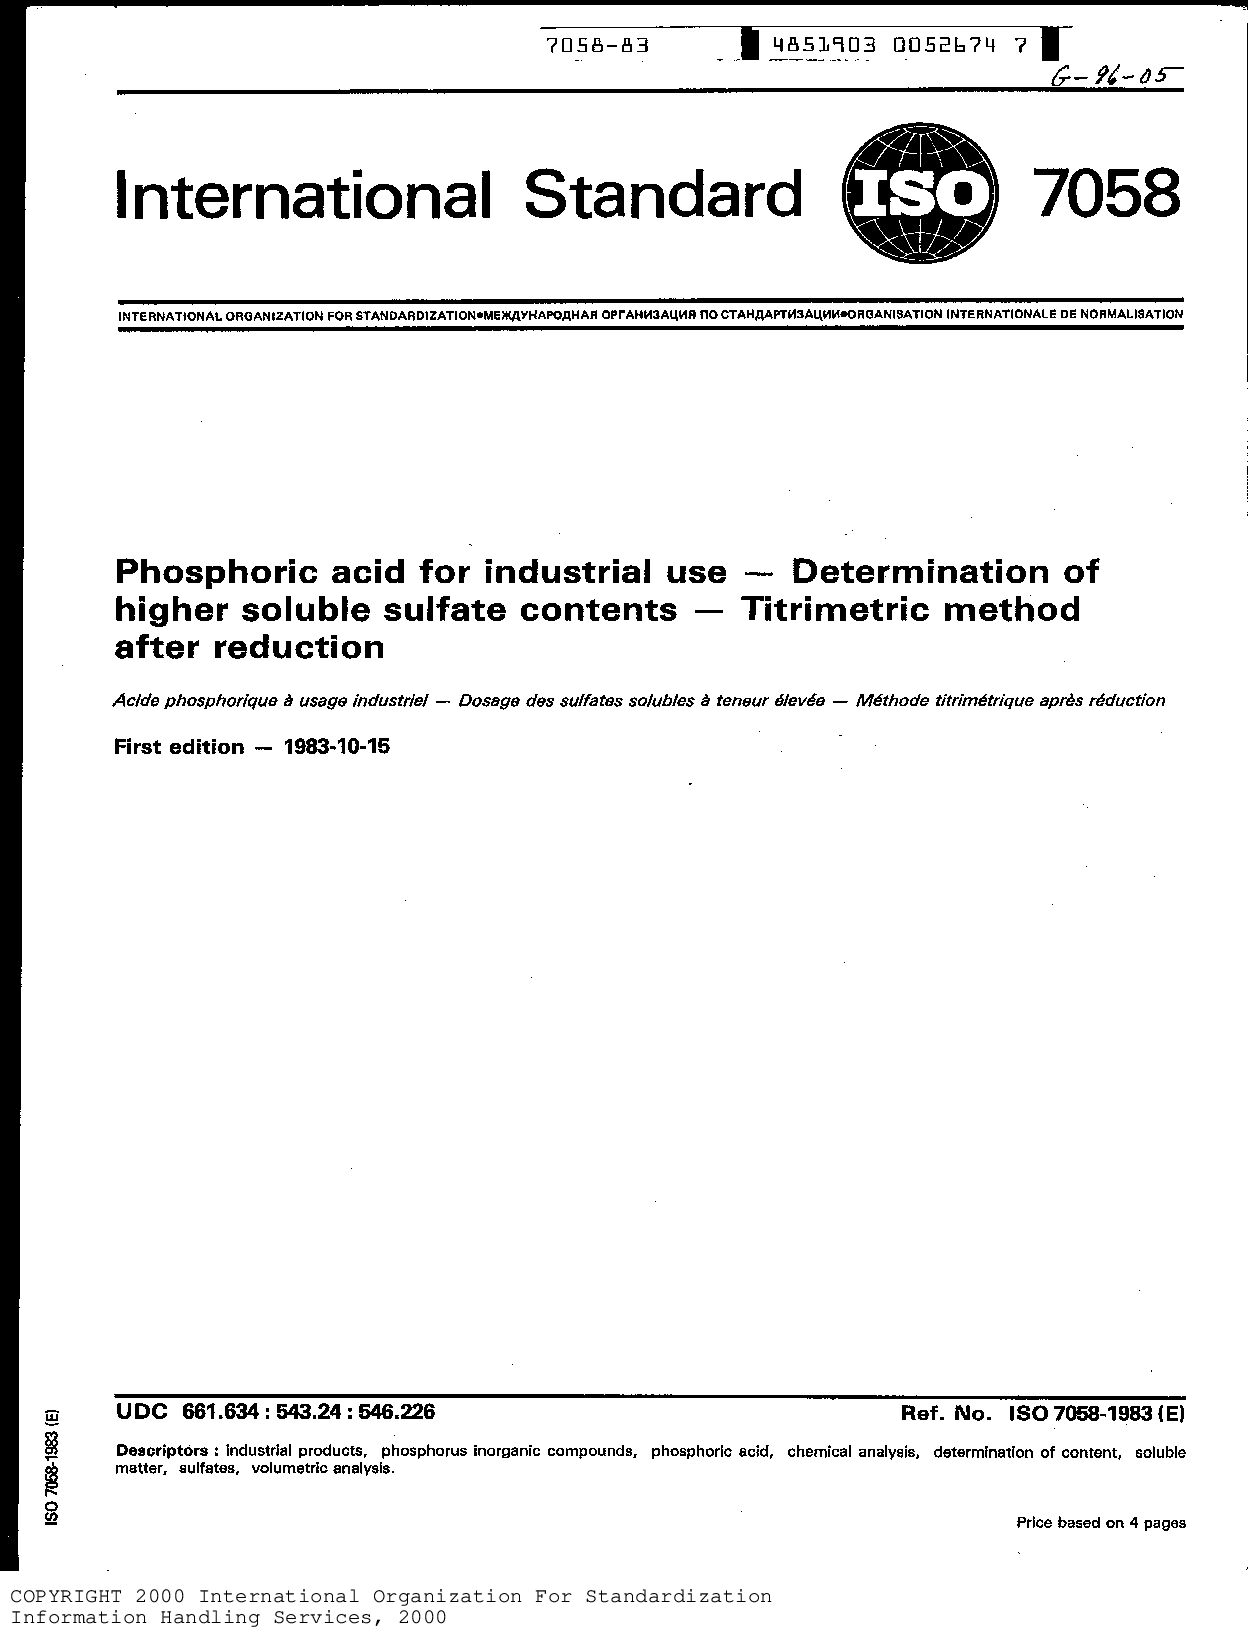 ISO 7058-1983